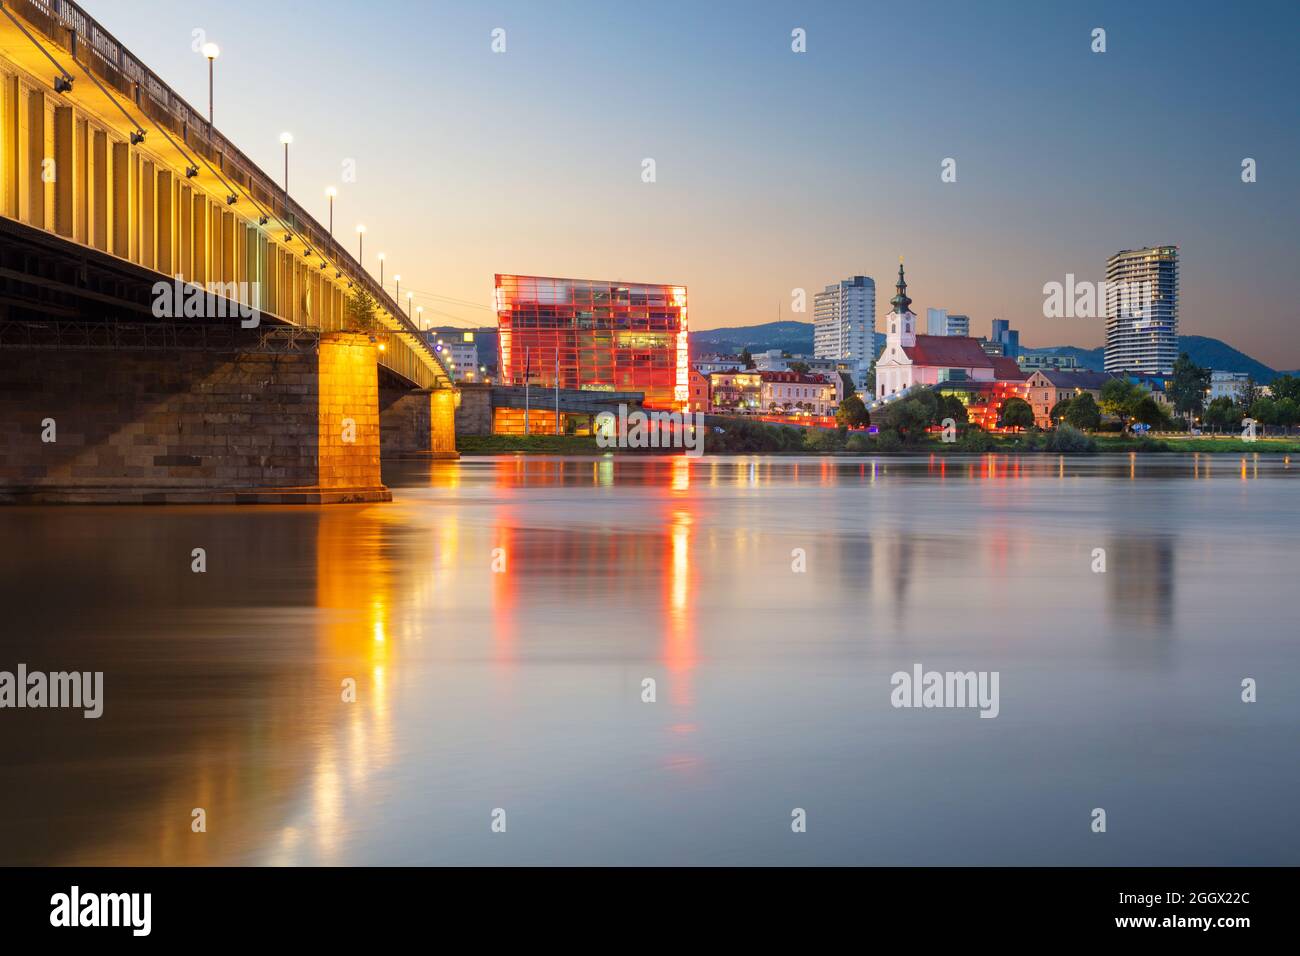 Linz, Austria. Cityscape image of riverside Linz, Austria at summer sunset with reflection of the city lights in Danube river. Stock Photo